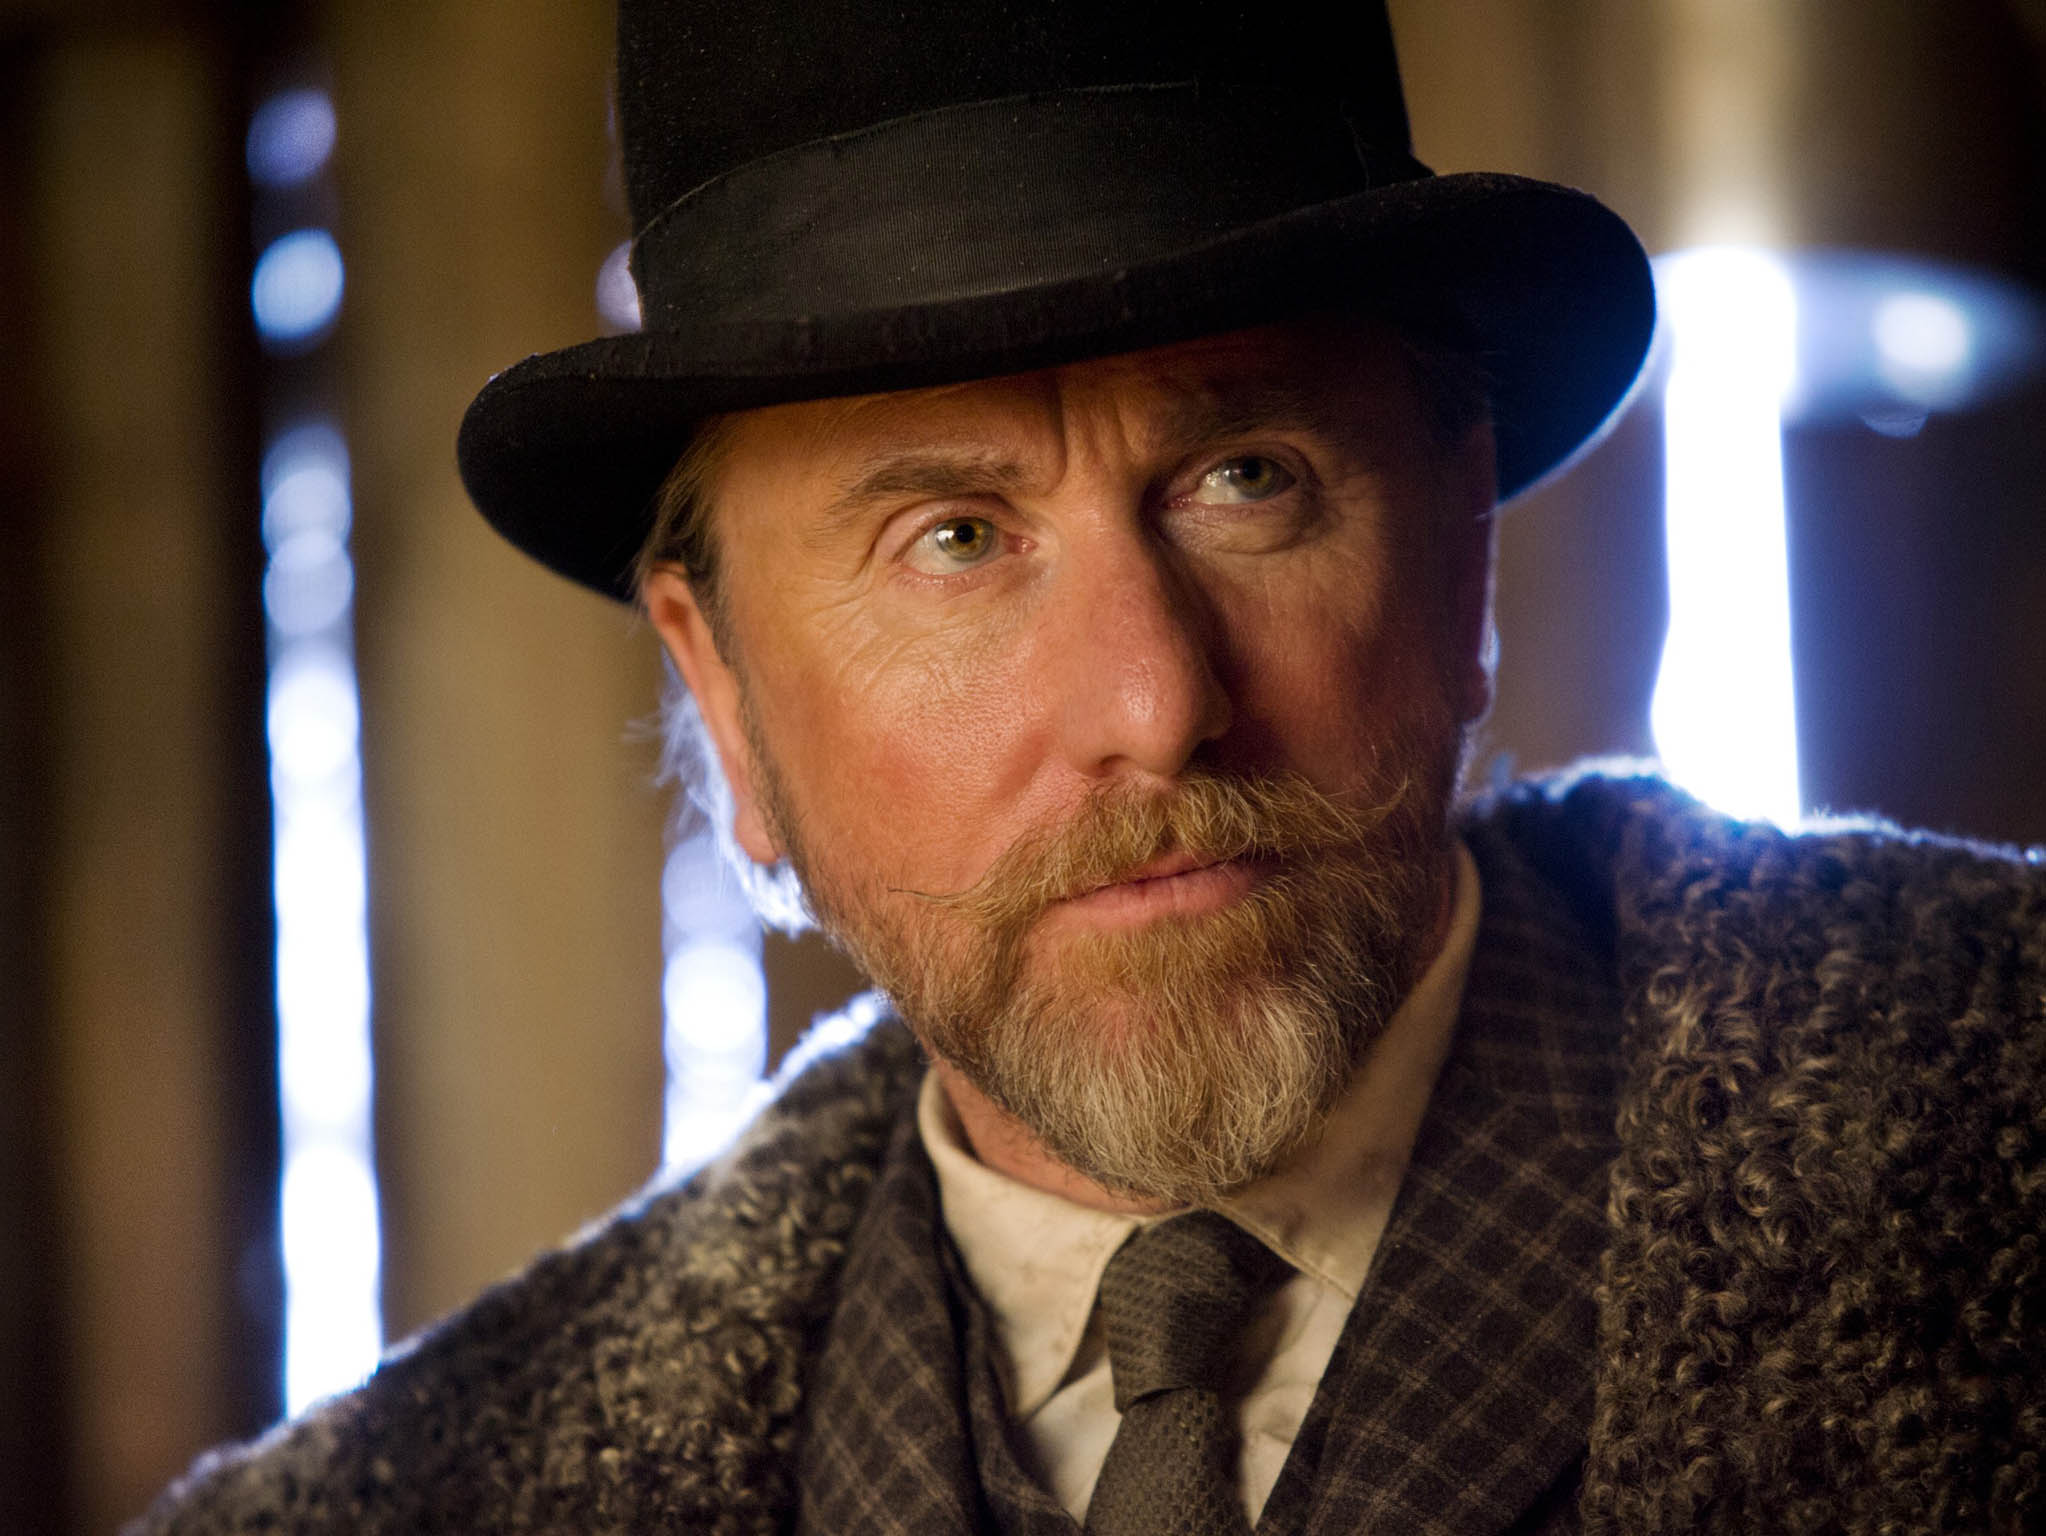 Tim Roth stars in the Hateful Eight